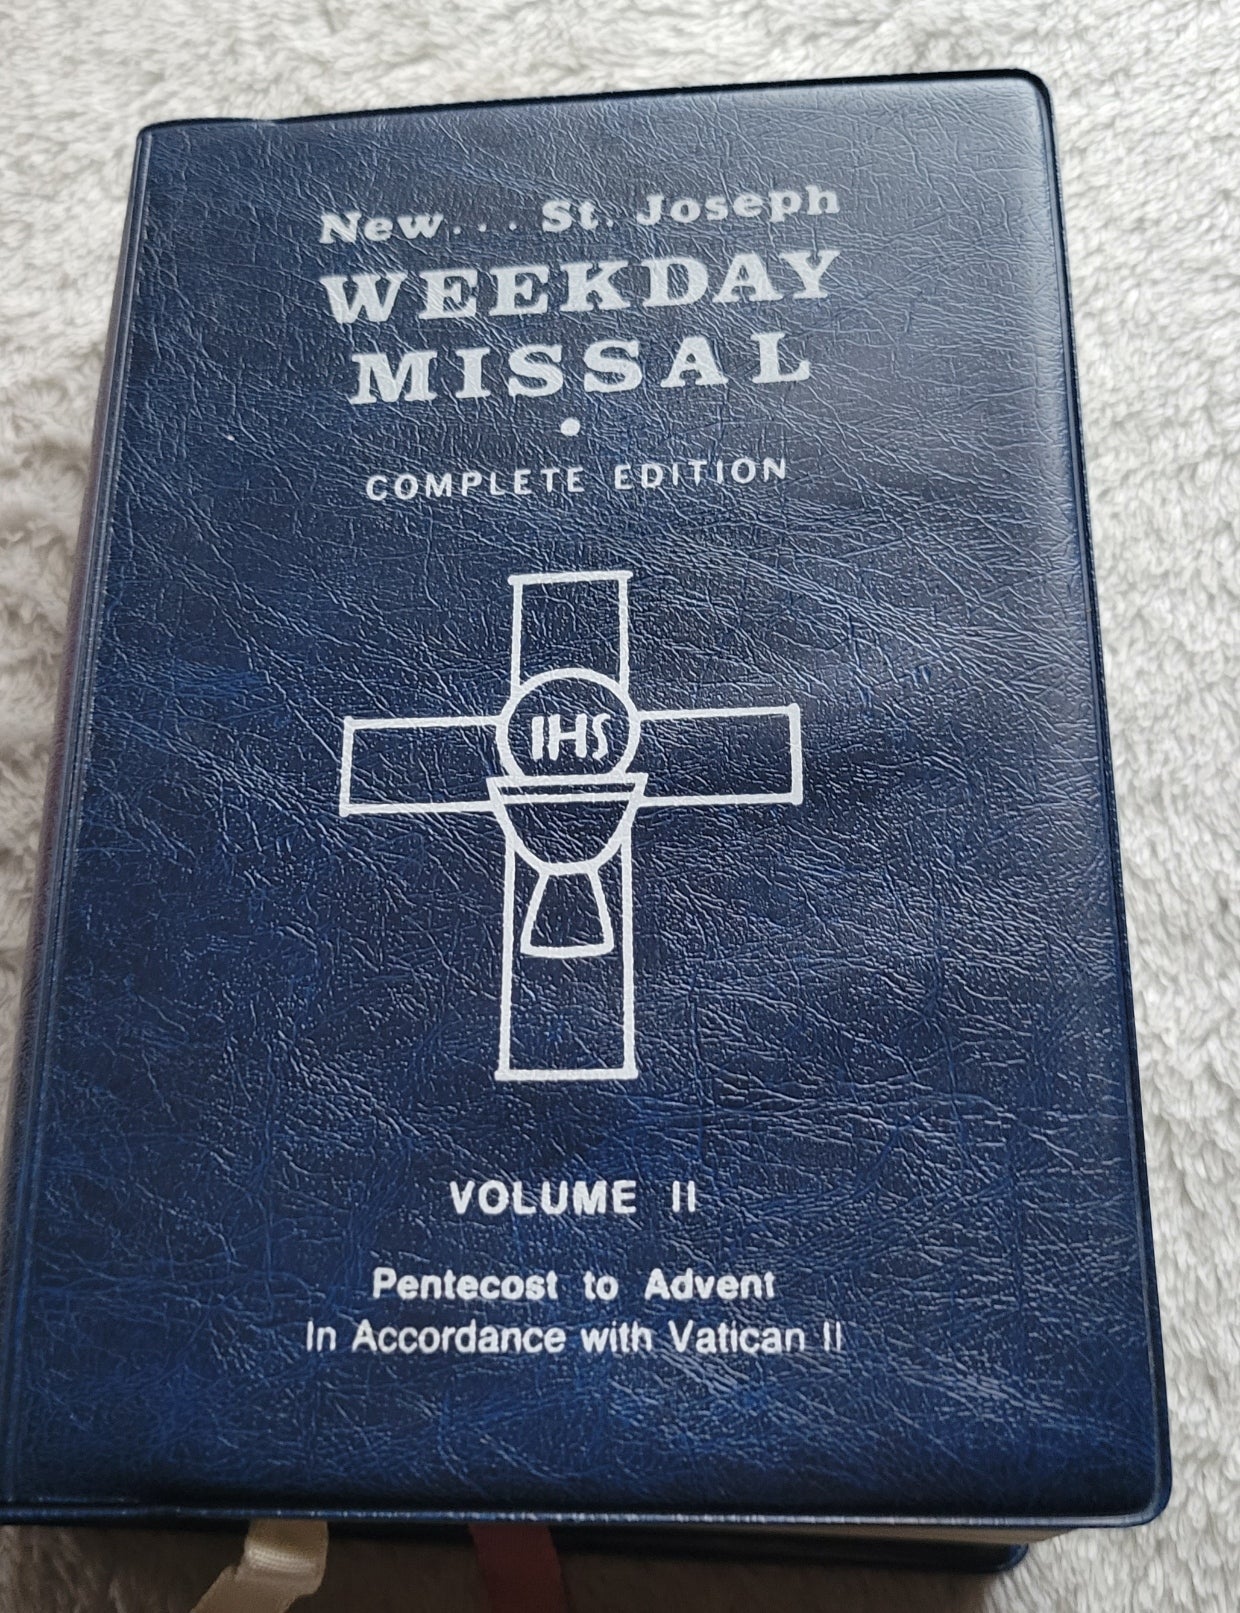 Vintage book for sale, "New....St. Joseph Weekday Missal Vol 2: Advent to Pentecost" Complete Edition, by the Catholic Book Publishing Company, "In accordance with Vatican II". View of front cover.